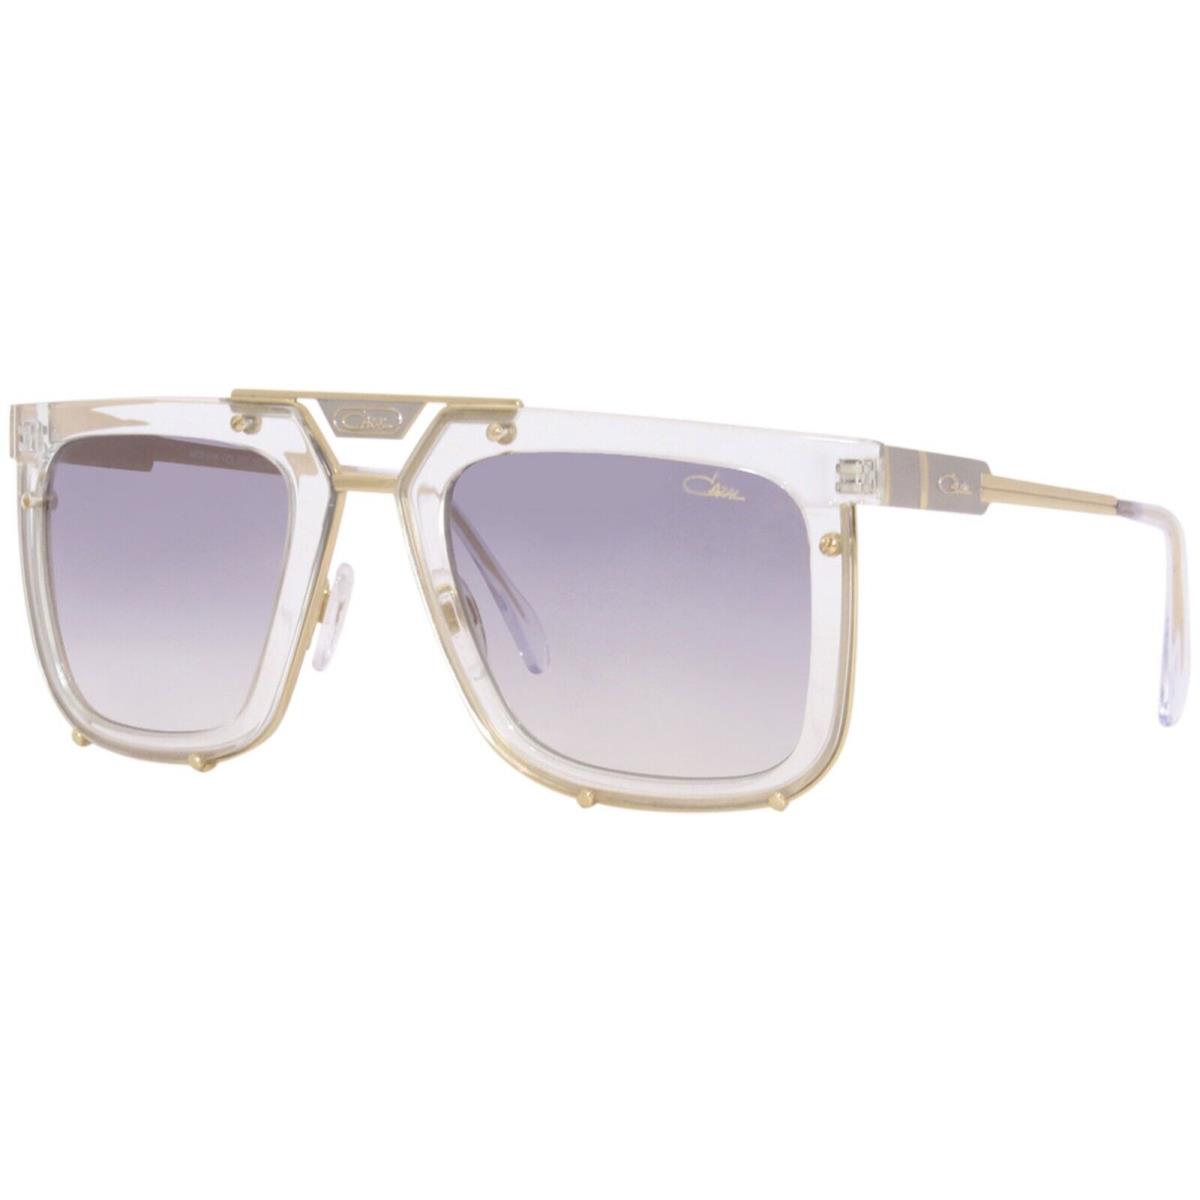 Cazal Legends Mod. 648 Col. 003 Crystal Gold Plated Sunglasses Made IN Germany - Frame: Crystal/Gold, Lens: Gray